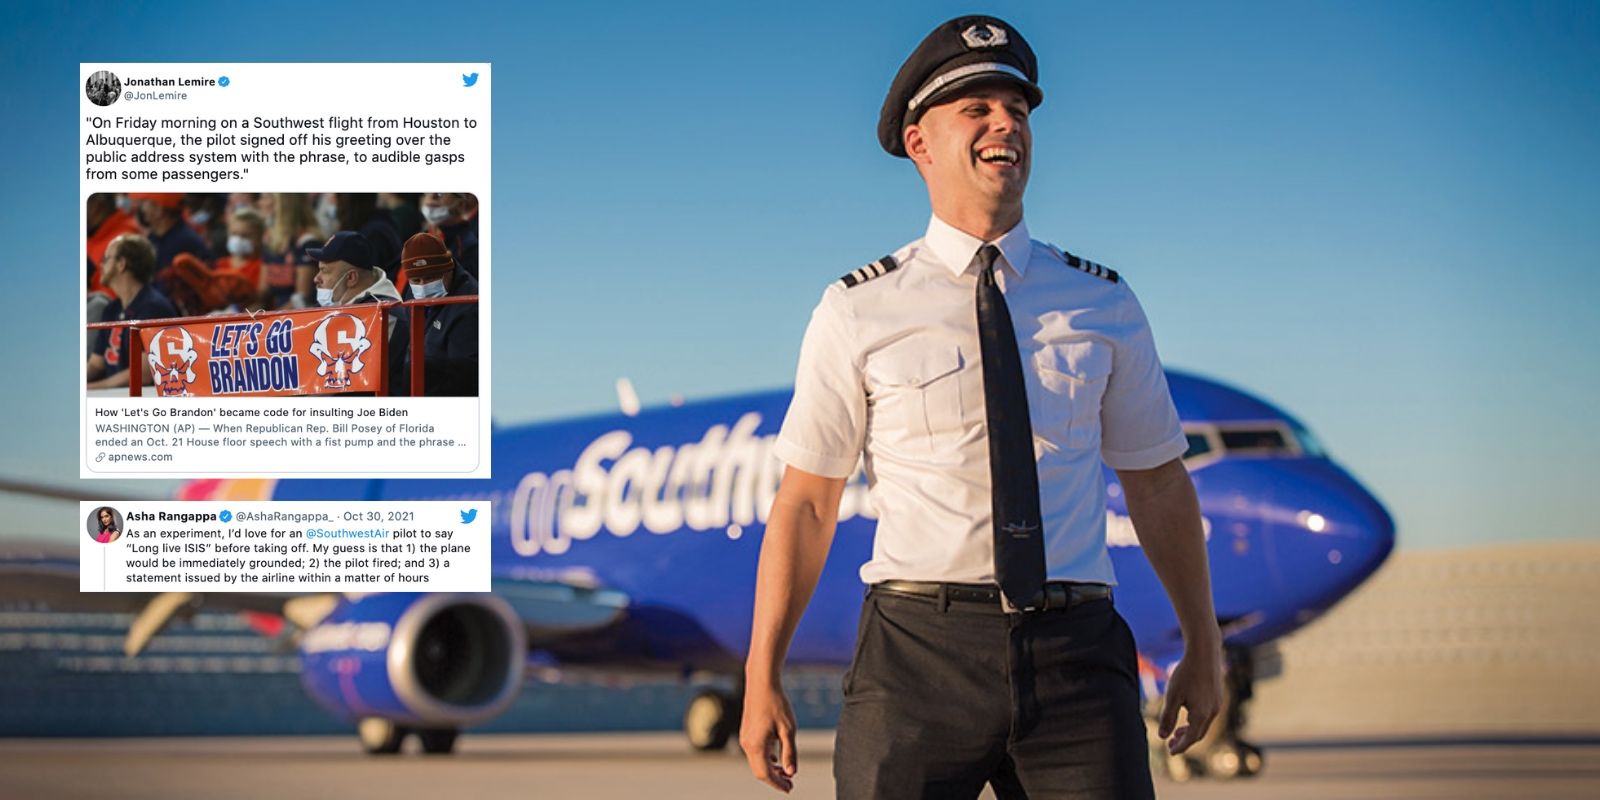 Media, activists call for Southwest pilot to be fired because he said 'Let's go Brandon' on plane